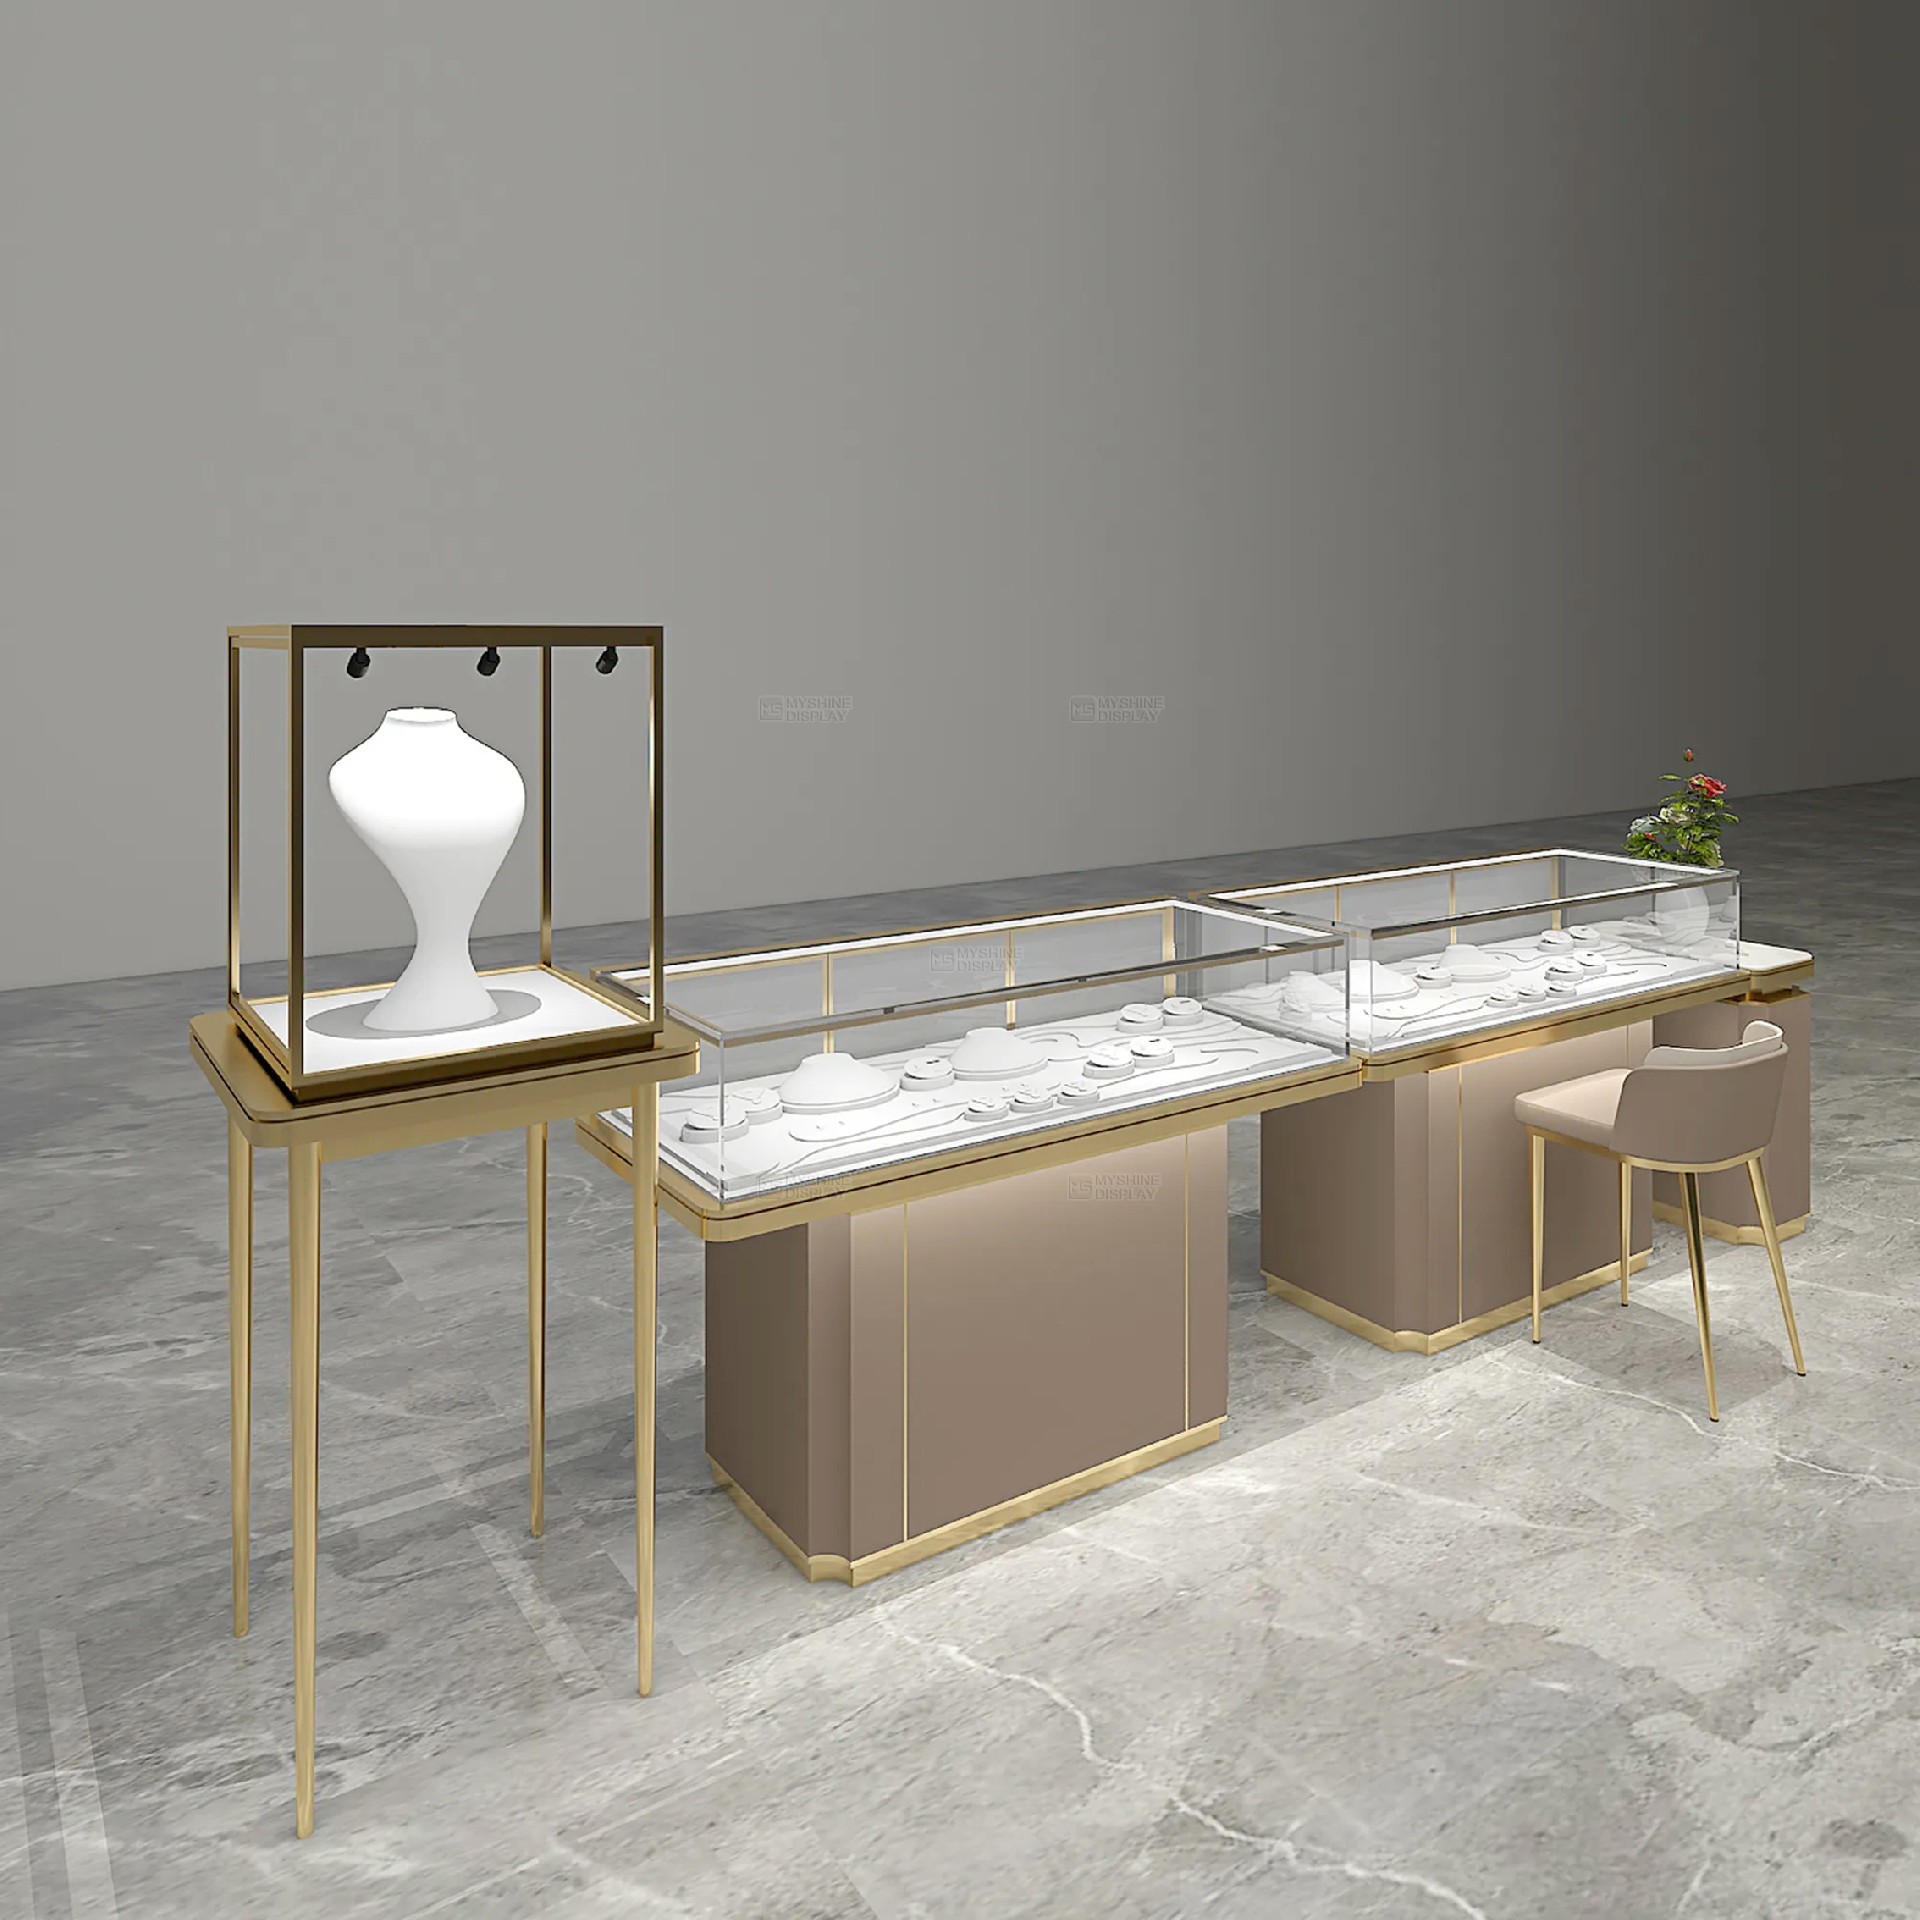 MYSHINE DISPLAY Sophisticated Metal-Glass Jewelry Showcase with Consultation Space 119